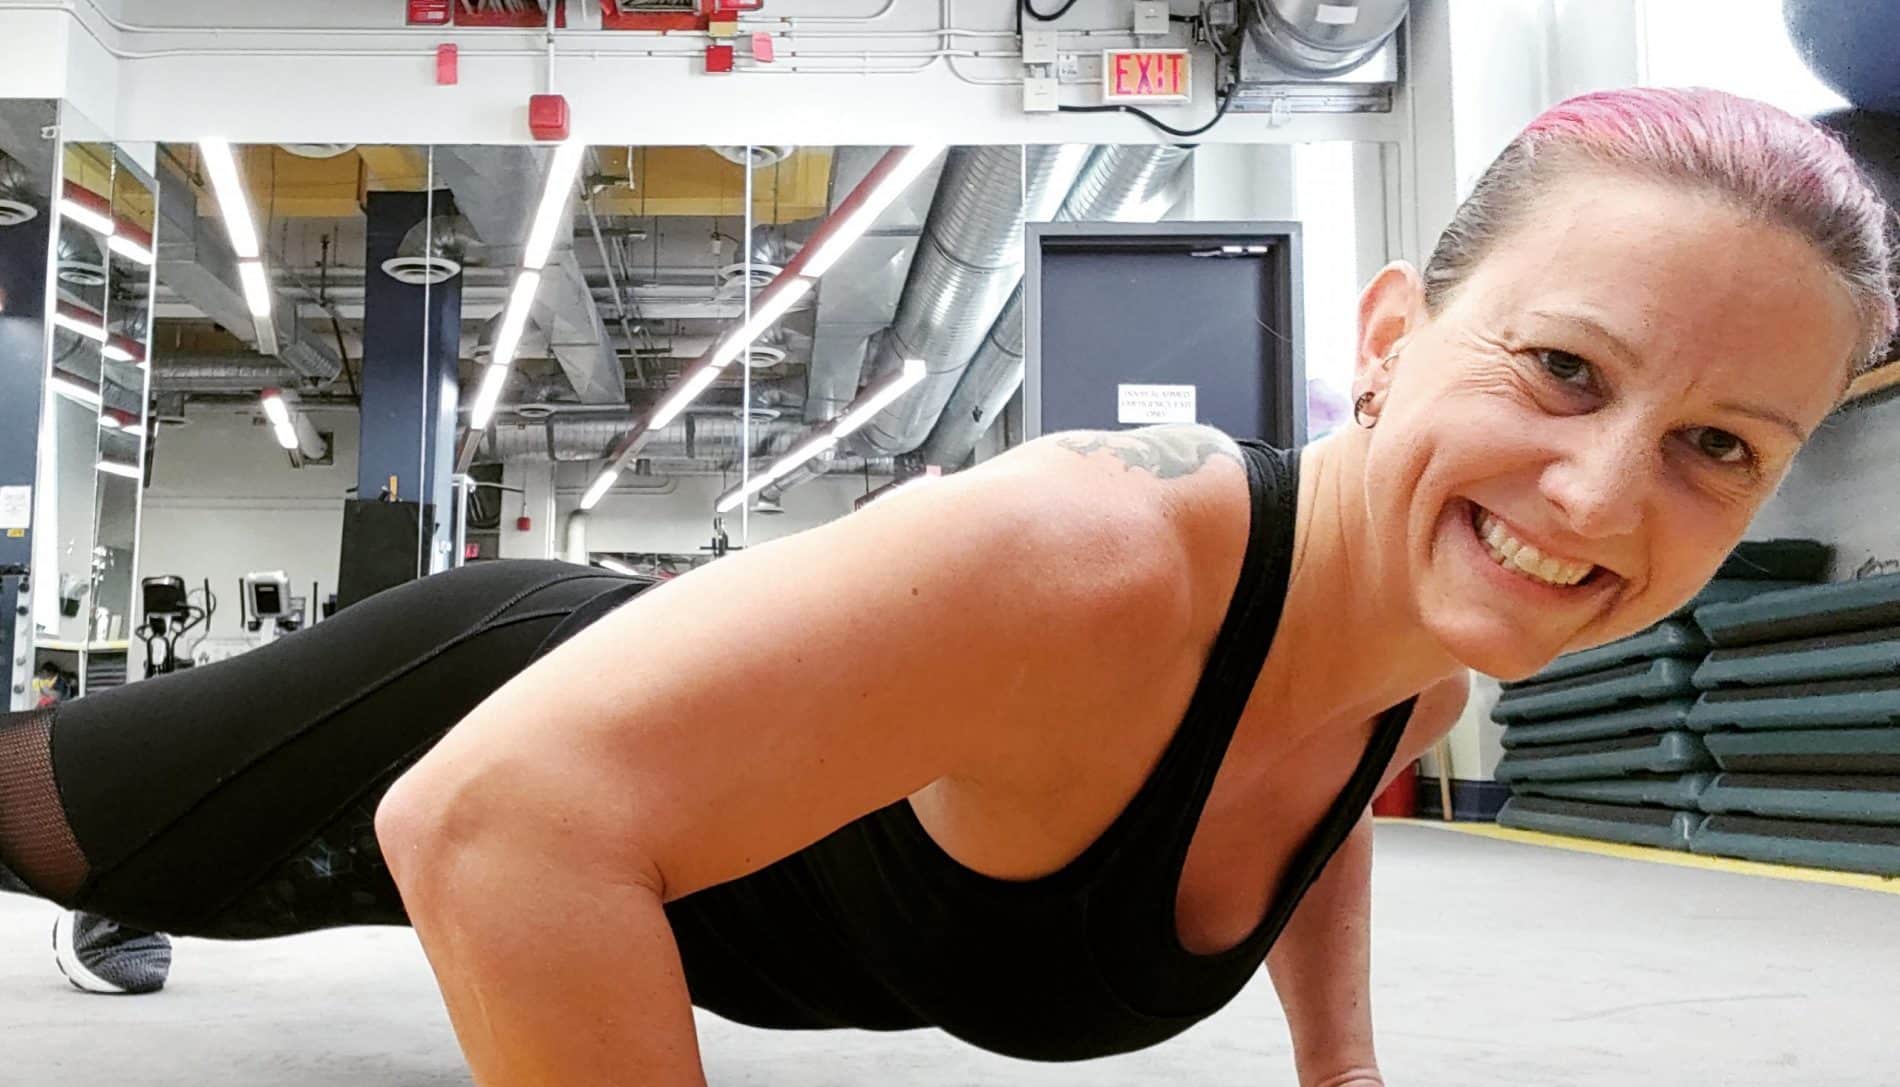 fitness trainer Milica holding a pushup position